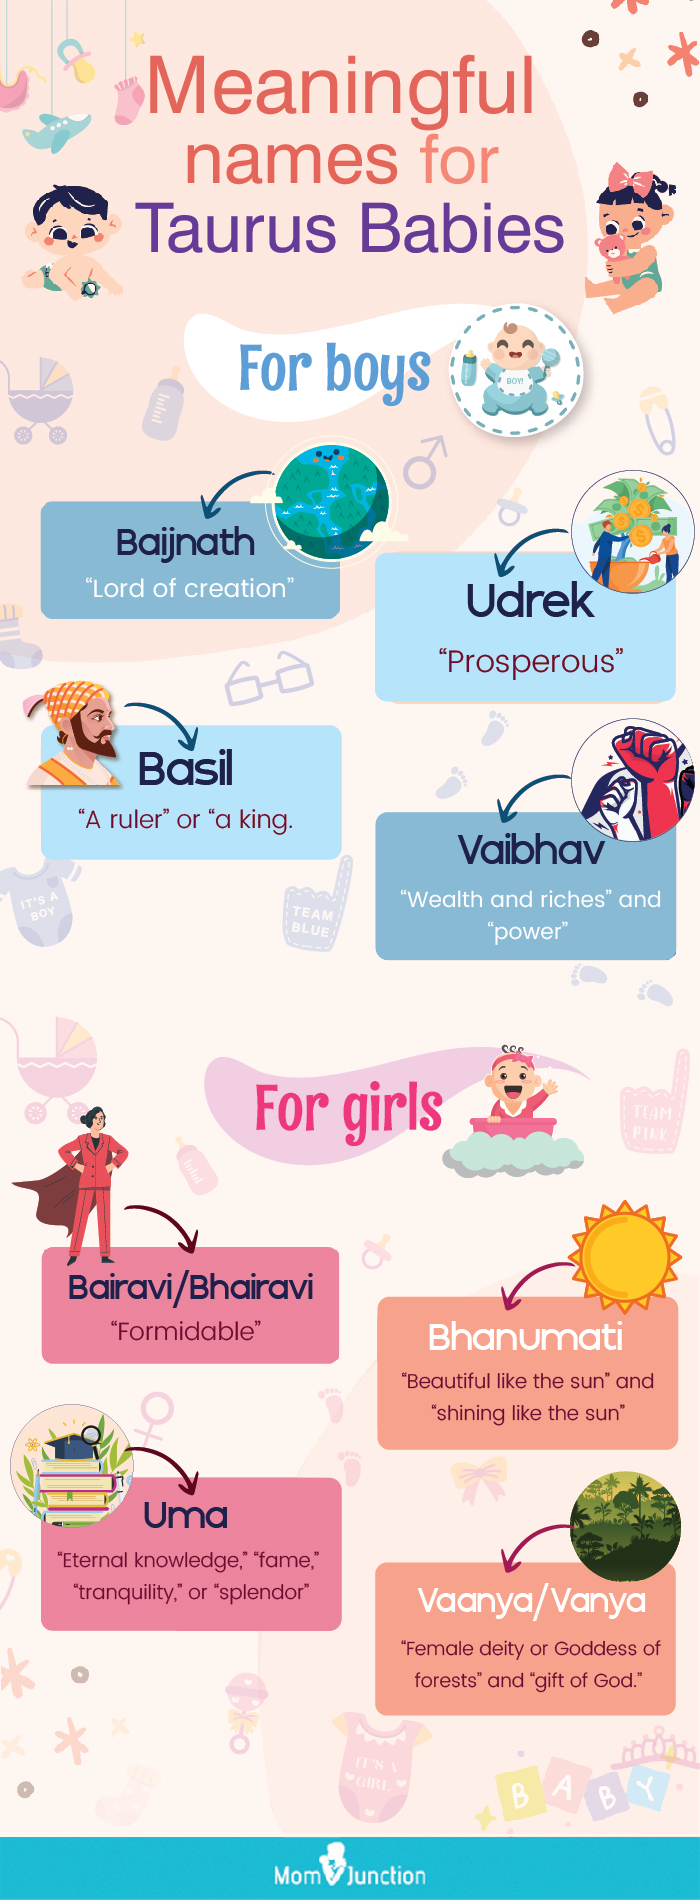 meaningful names for taurus babies (infographic)